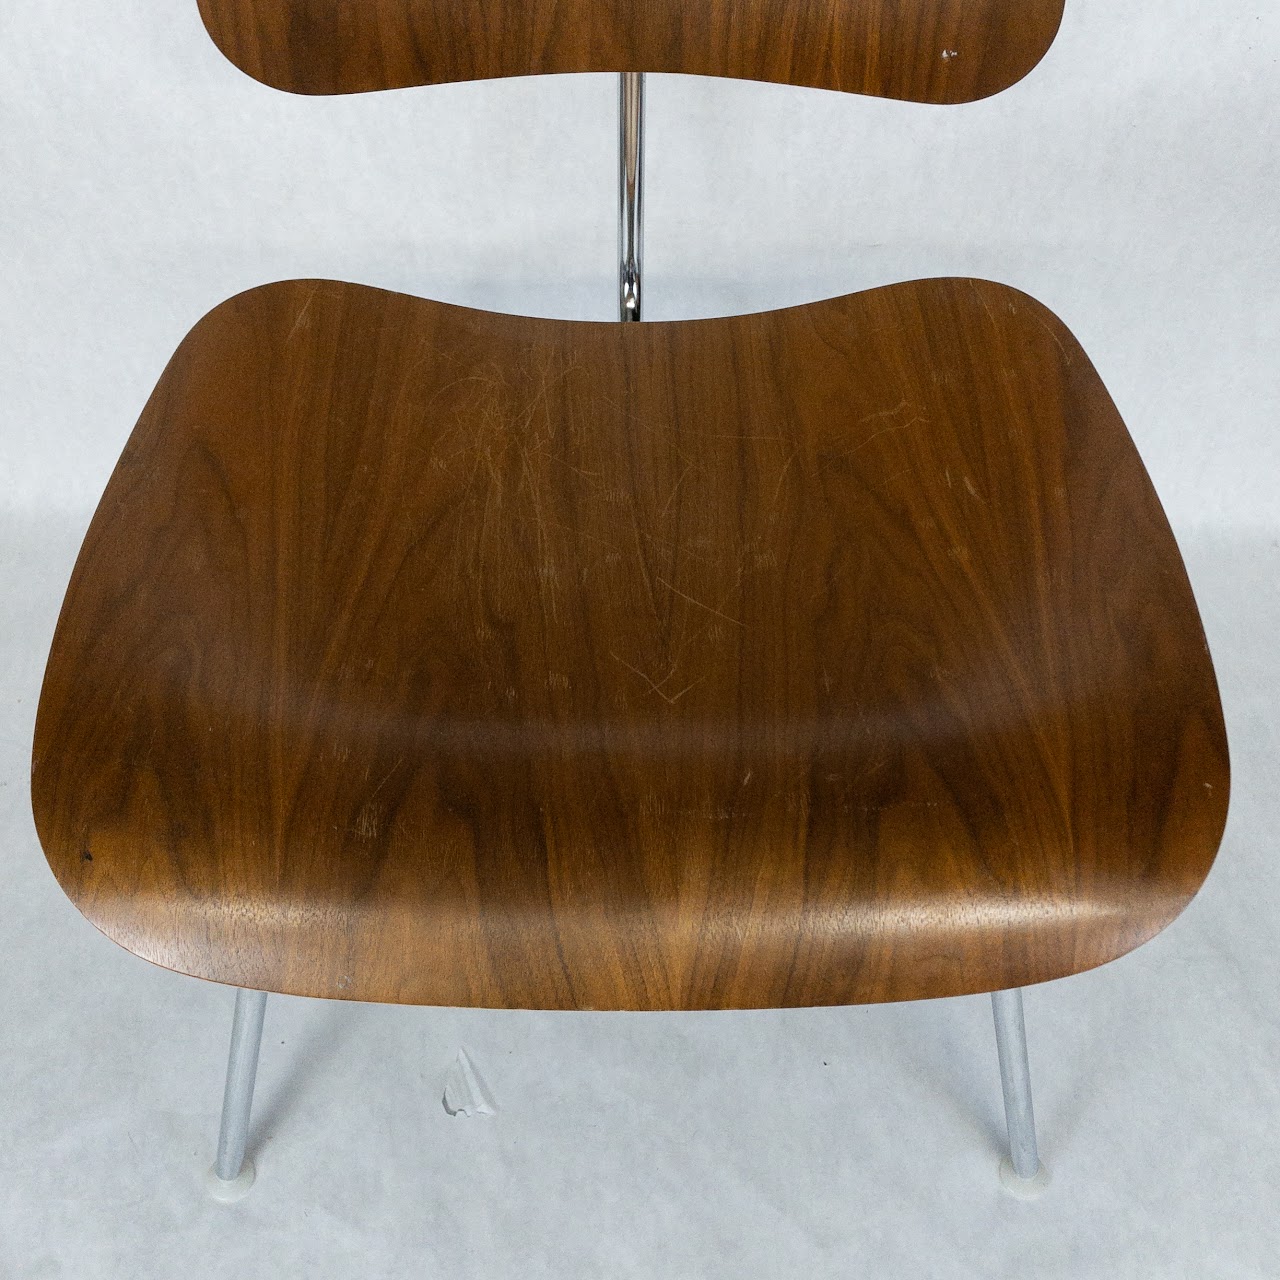 Eames Style Plywood Chair